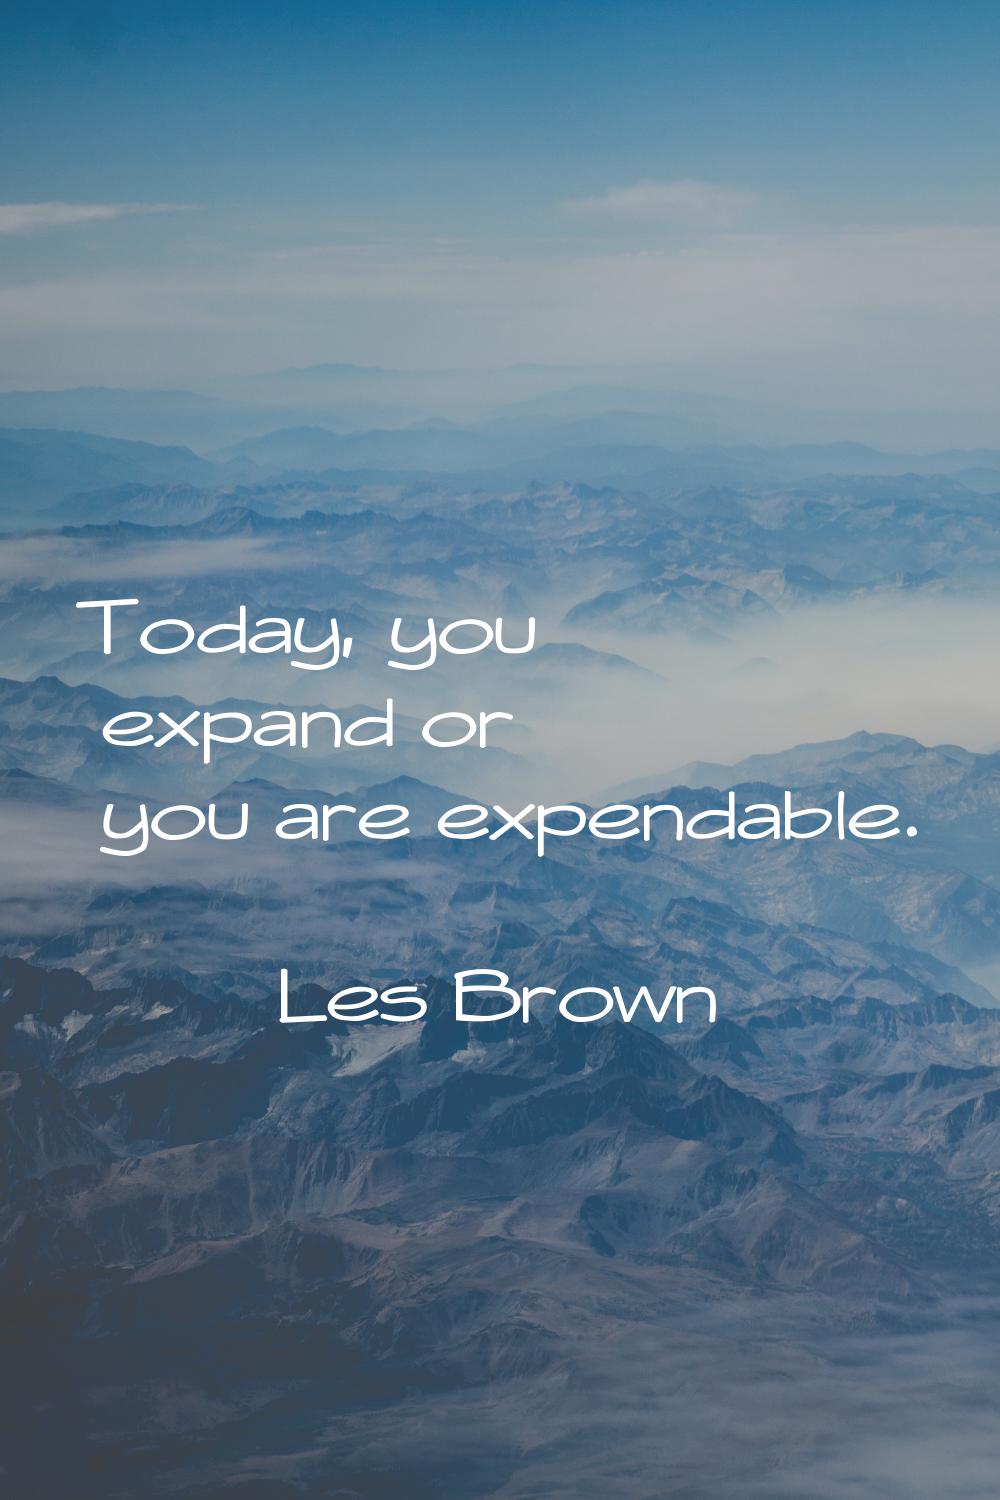 Today, you expand or you are expendable.